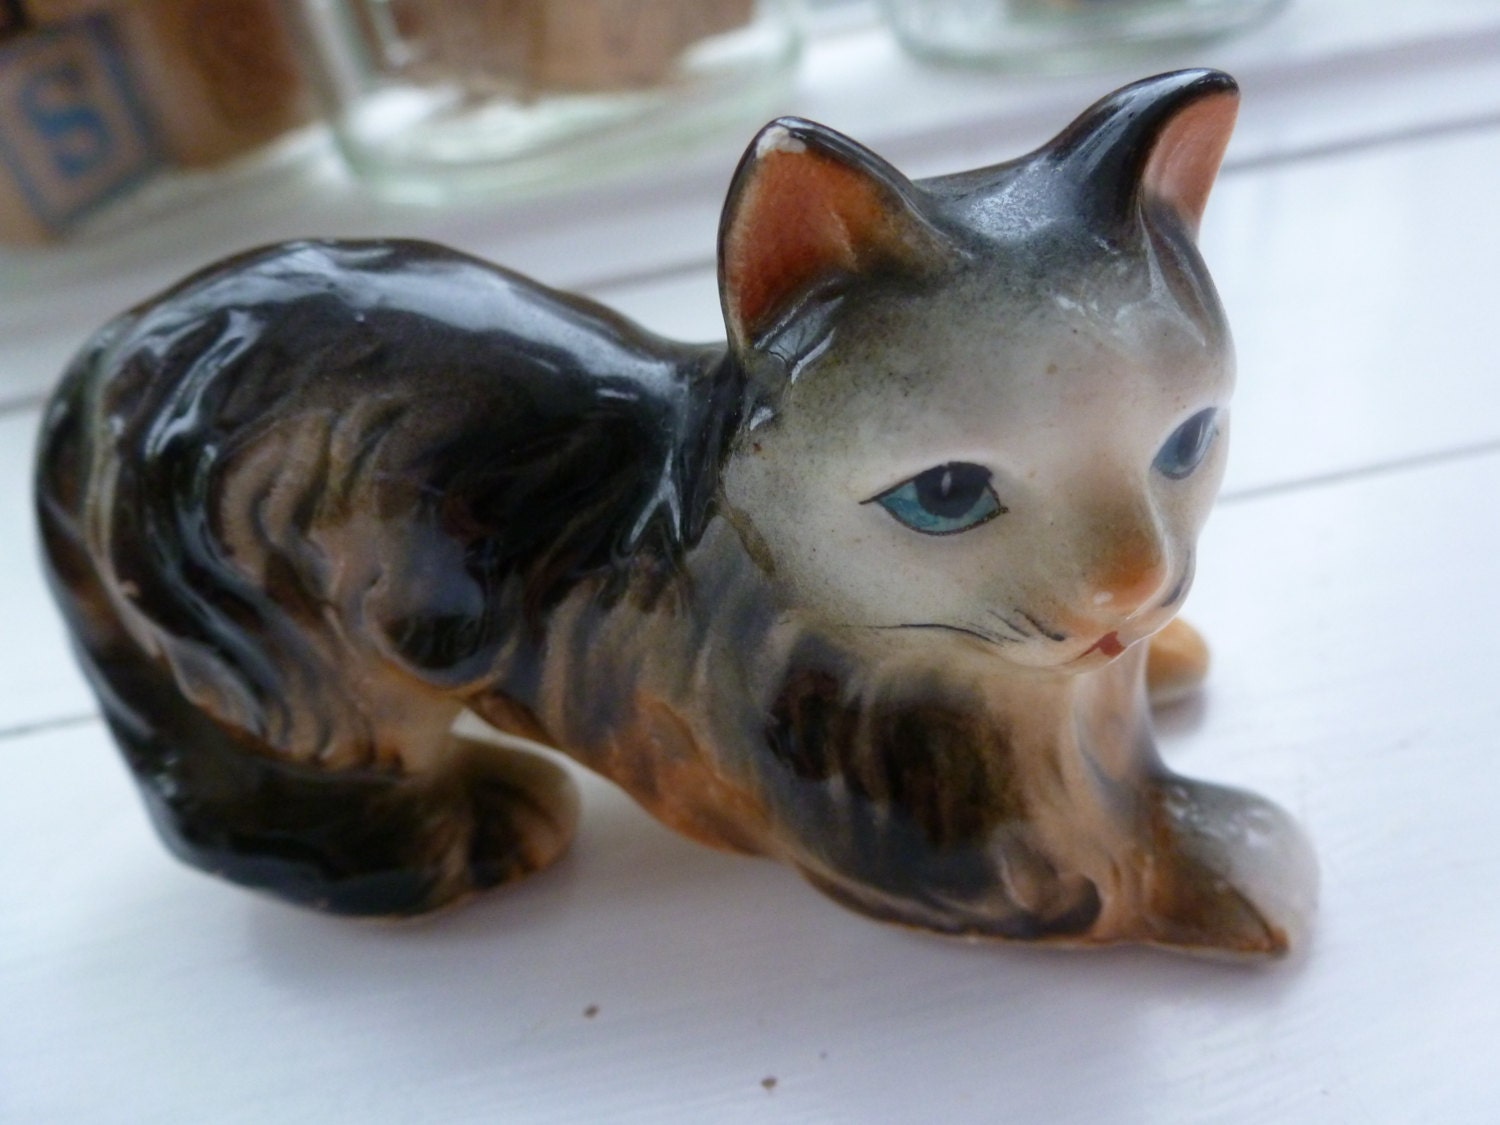  Vintage  1950s Ceramic  Cat  Figurine  Grey White and Tan For